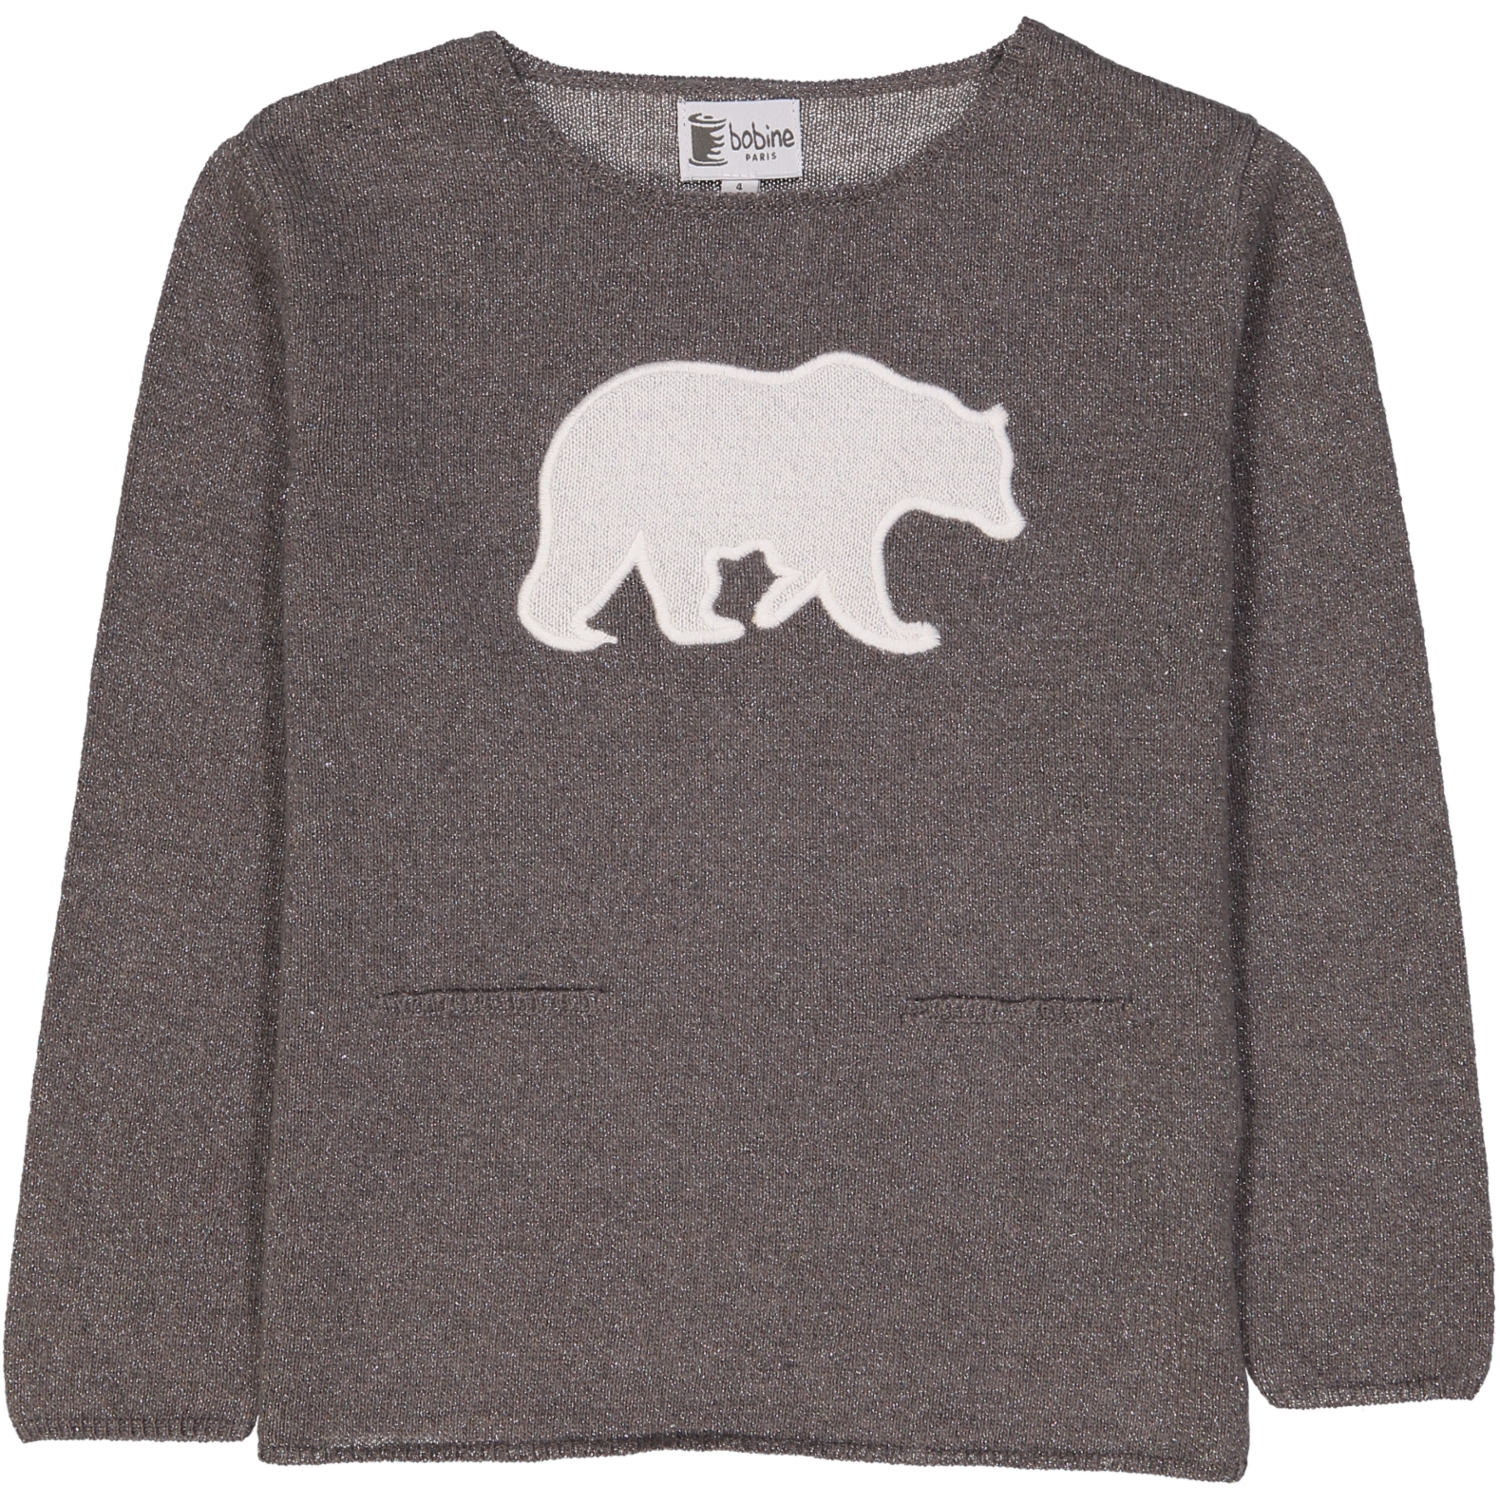 pull fille poche ours sirio taupe_1500x1500